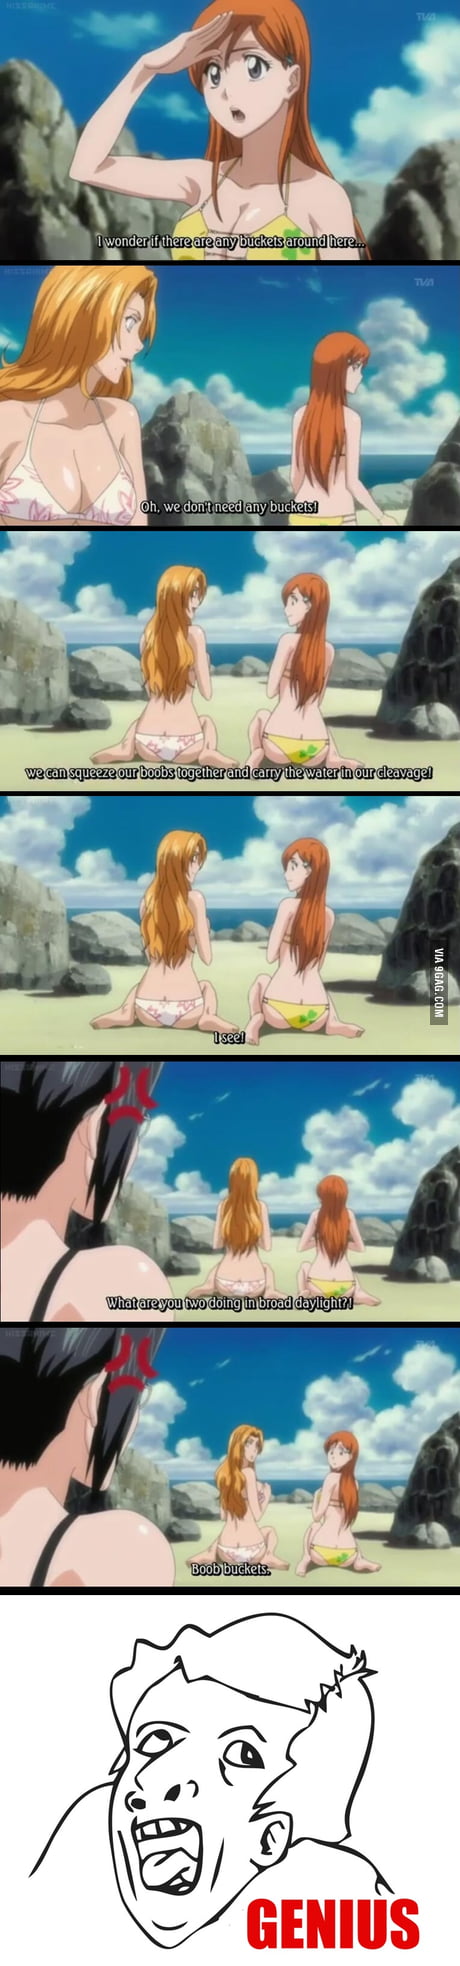 Anime Logic 101: When you don't have any buckets just use your boobs. - 9GAG